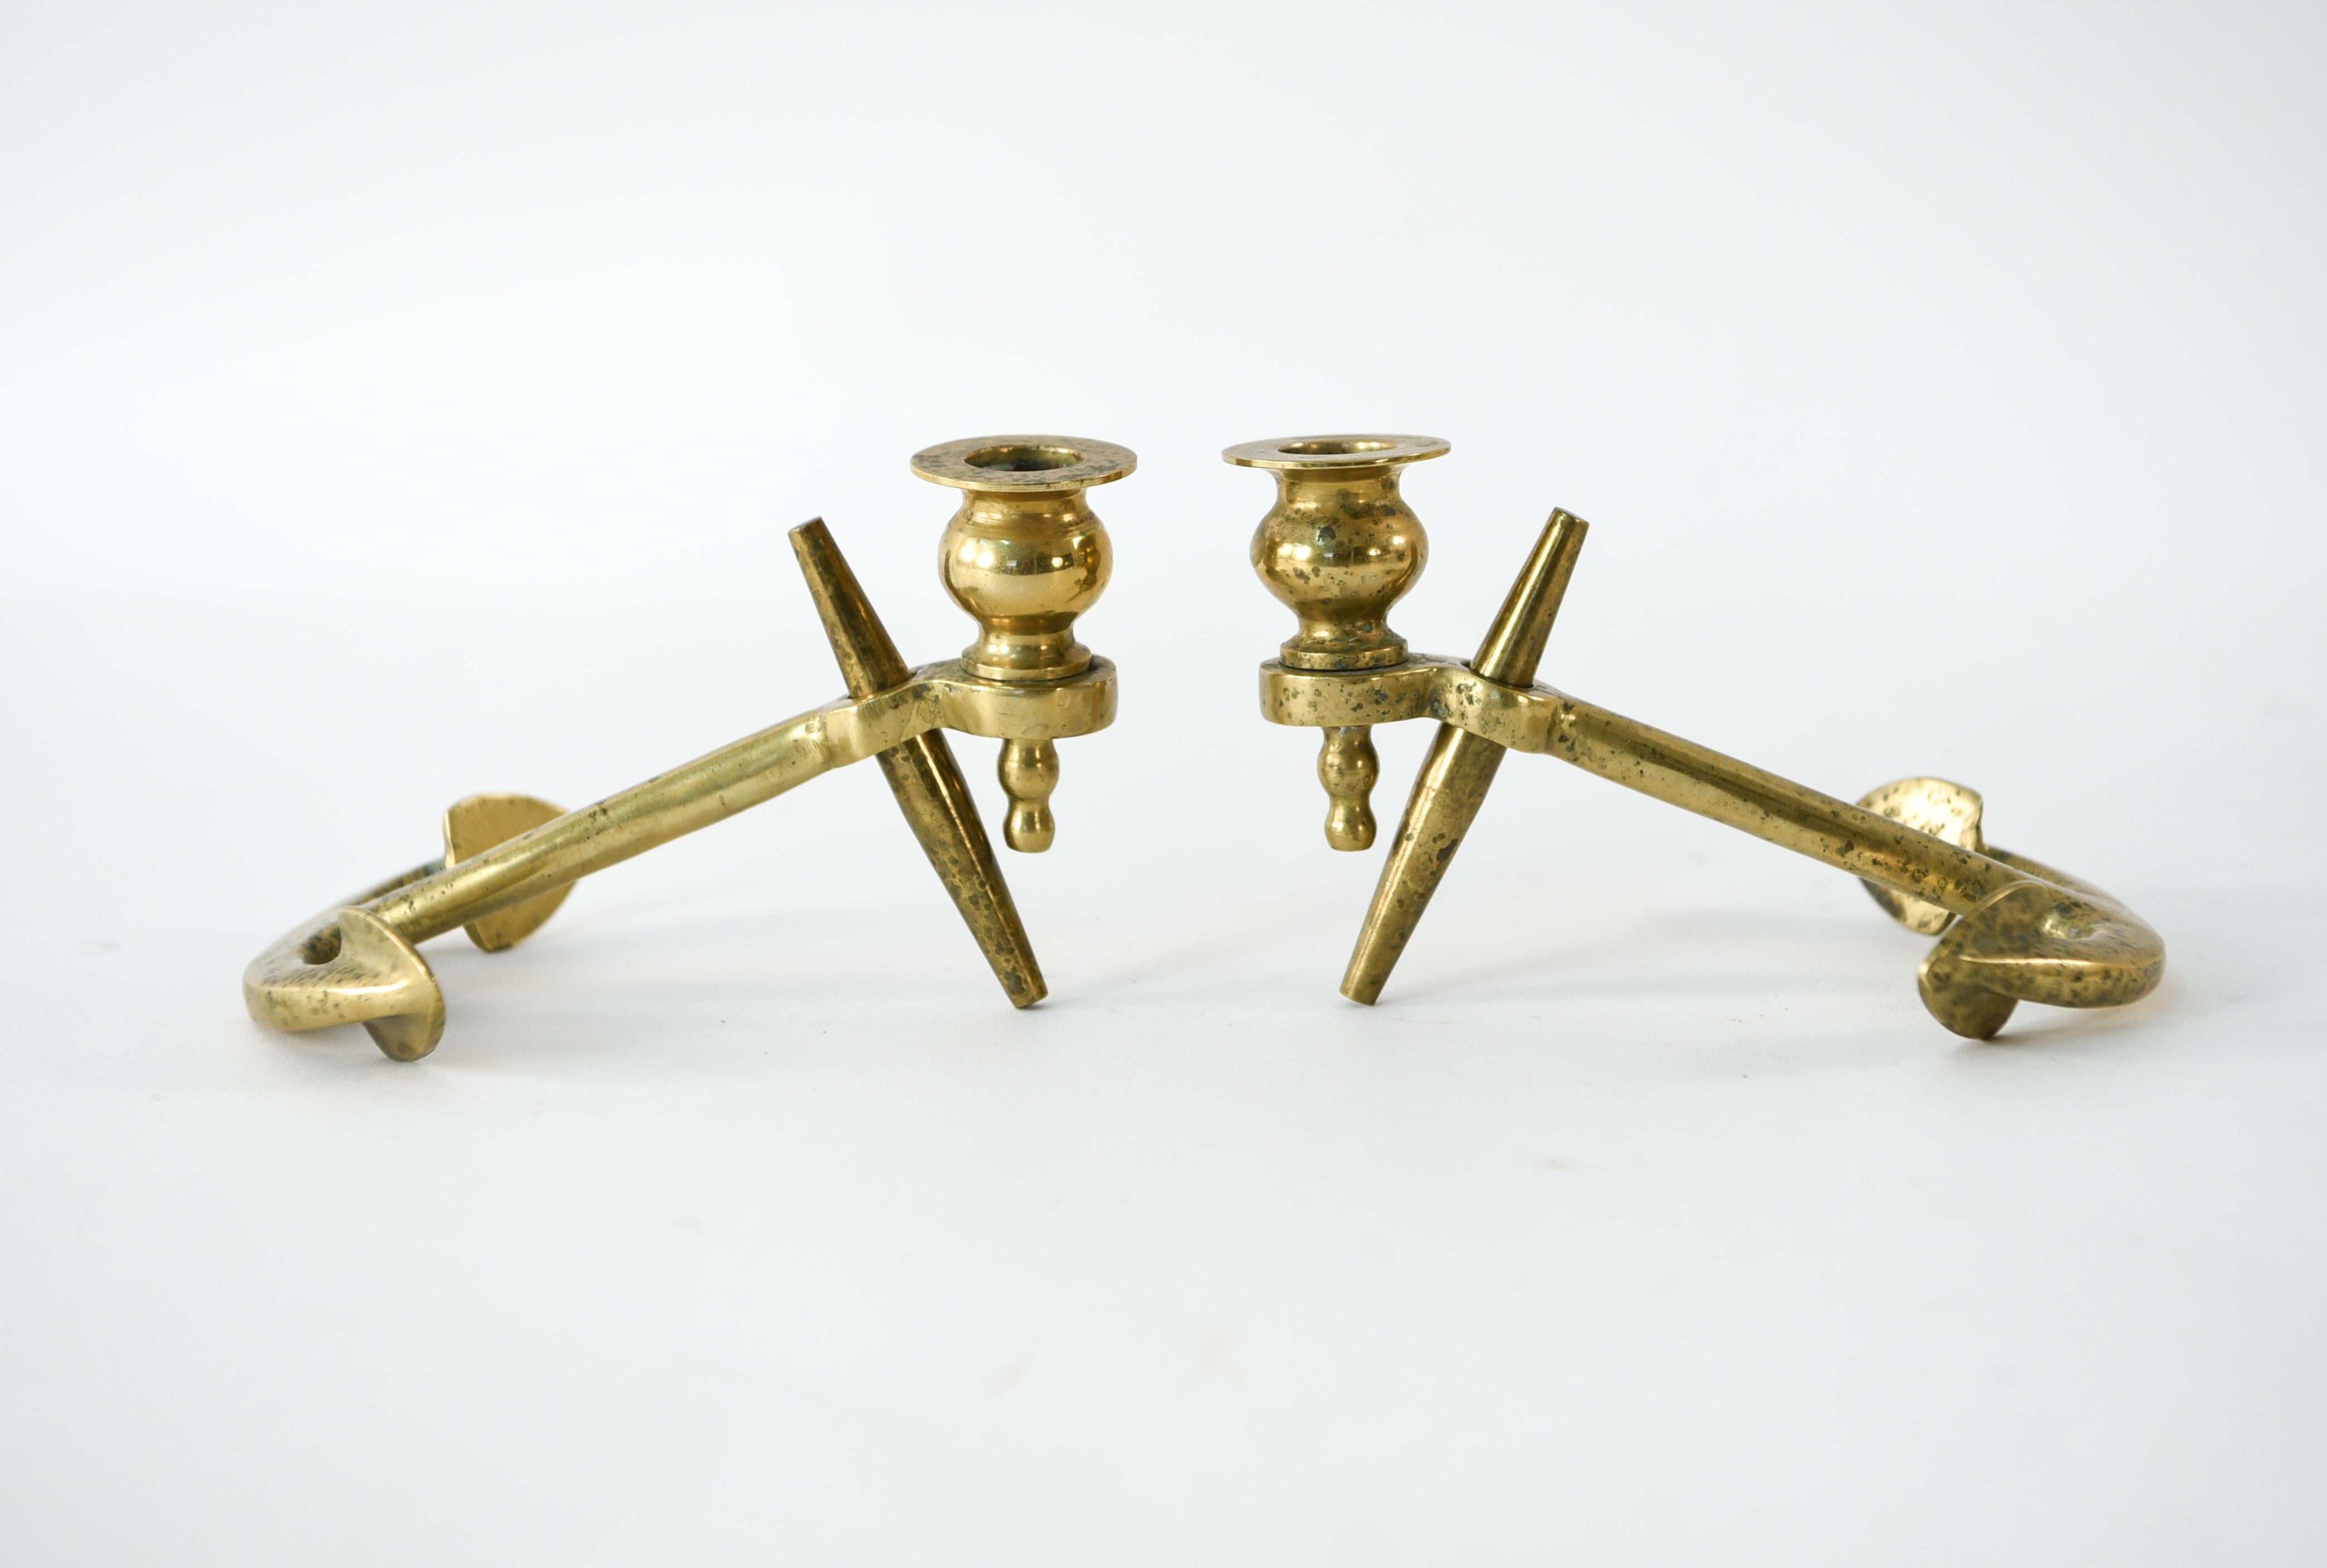 This is a charming pair of brass candlesticks in an anchor form. These would be lovely for a nautical themed interior.